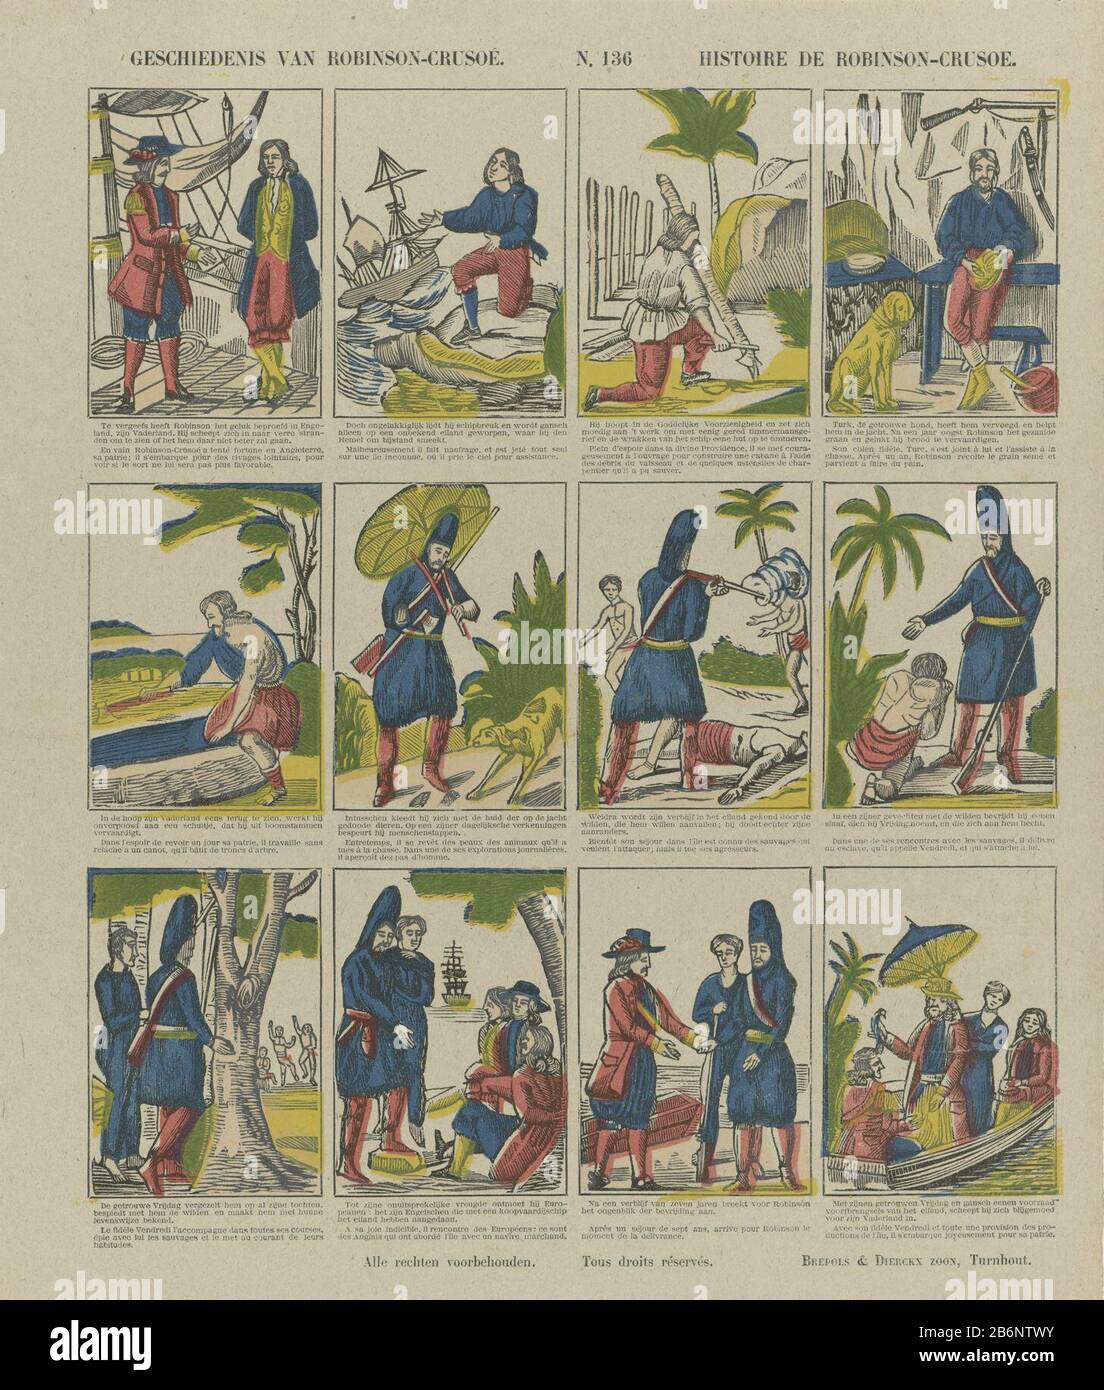 History of Robinson Crusoe / Histoire de Robinson Crusoe (title object)  Property Type: print people picture Item number: RP-P-OB-201.843  Inscriptions / Brands: collector's mark, verso, stamped: Lugt  2760octrooivermelding printed description : Leaf